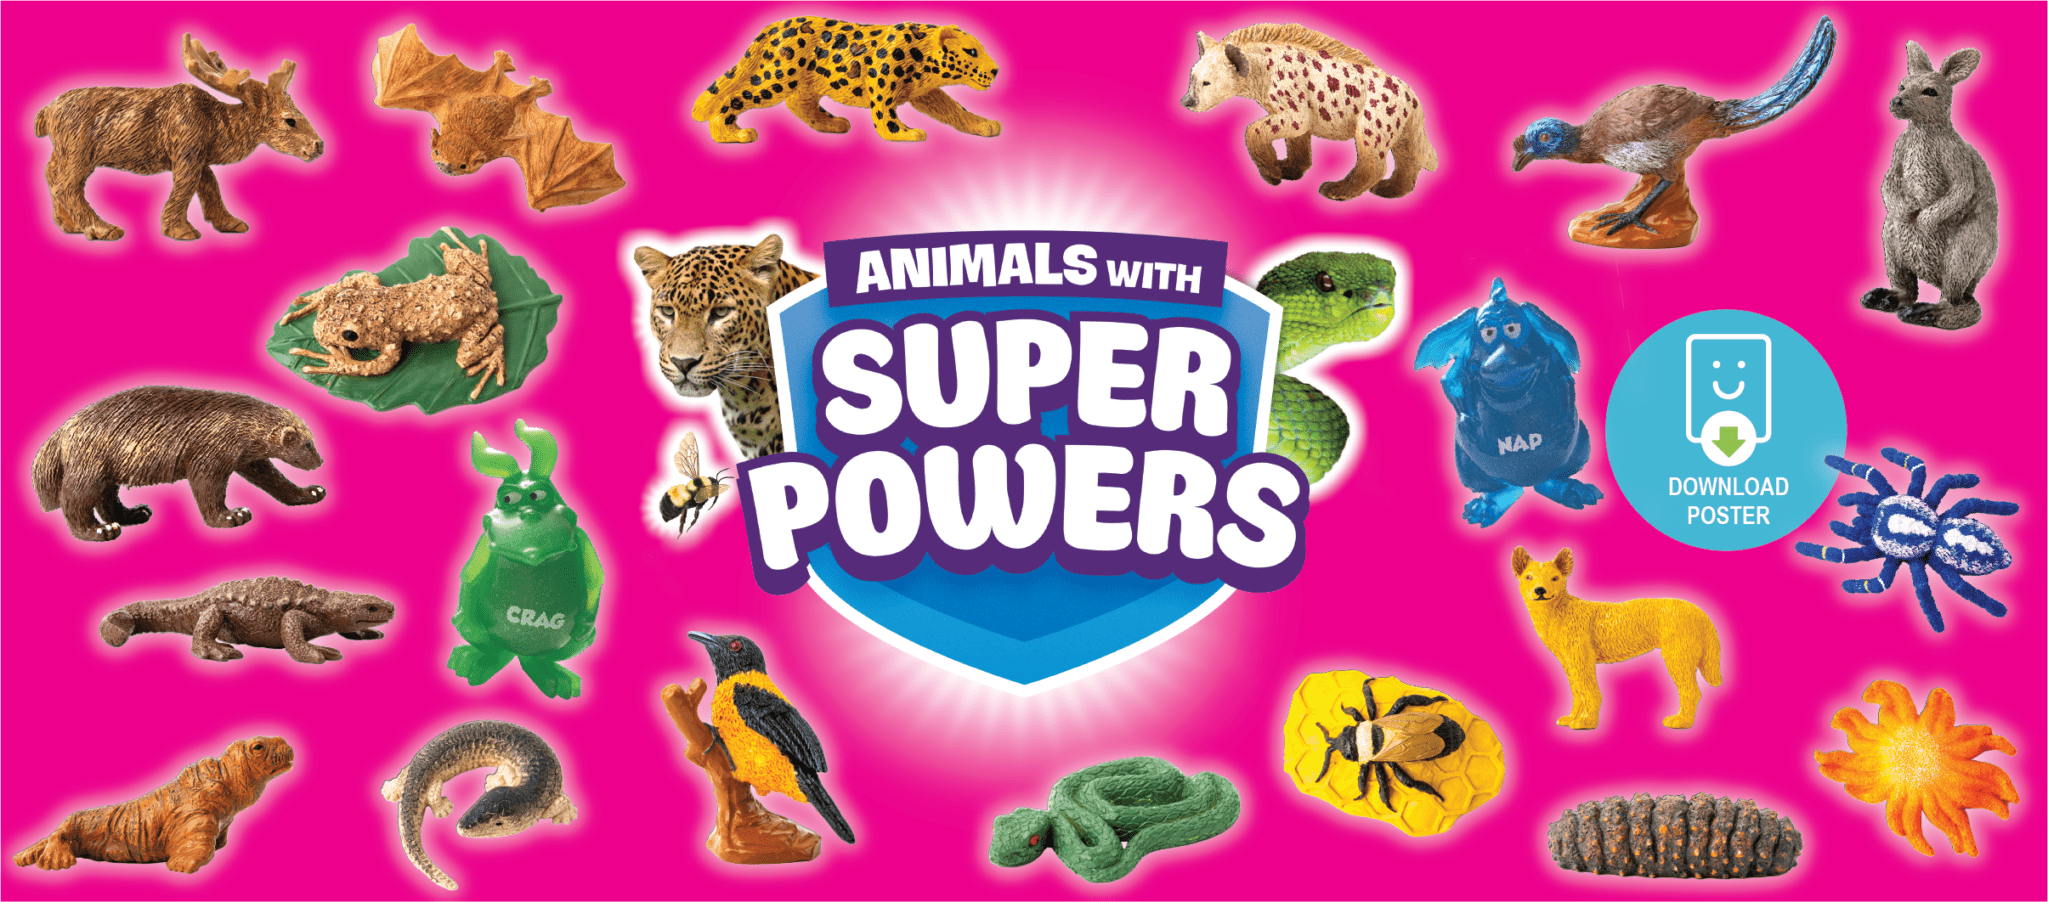 Animals with superpowers will come as a new 2021 Yowie USA series Animals-with-superpowers-2048x902